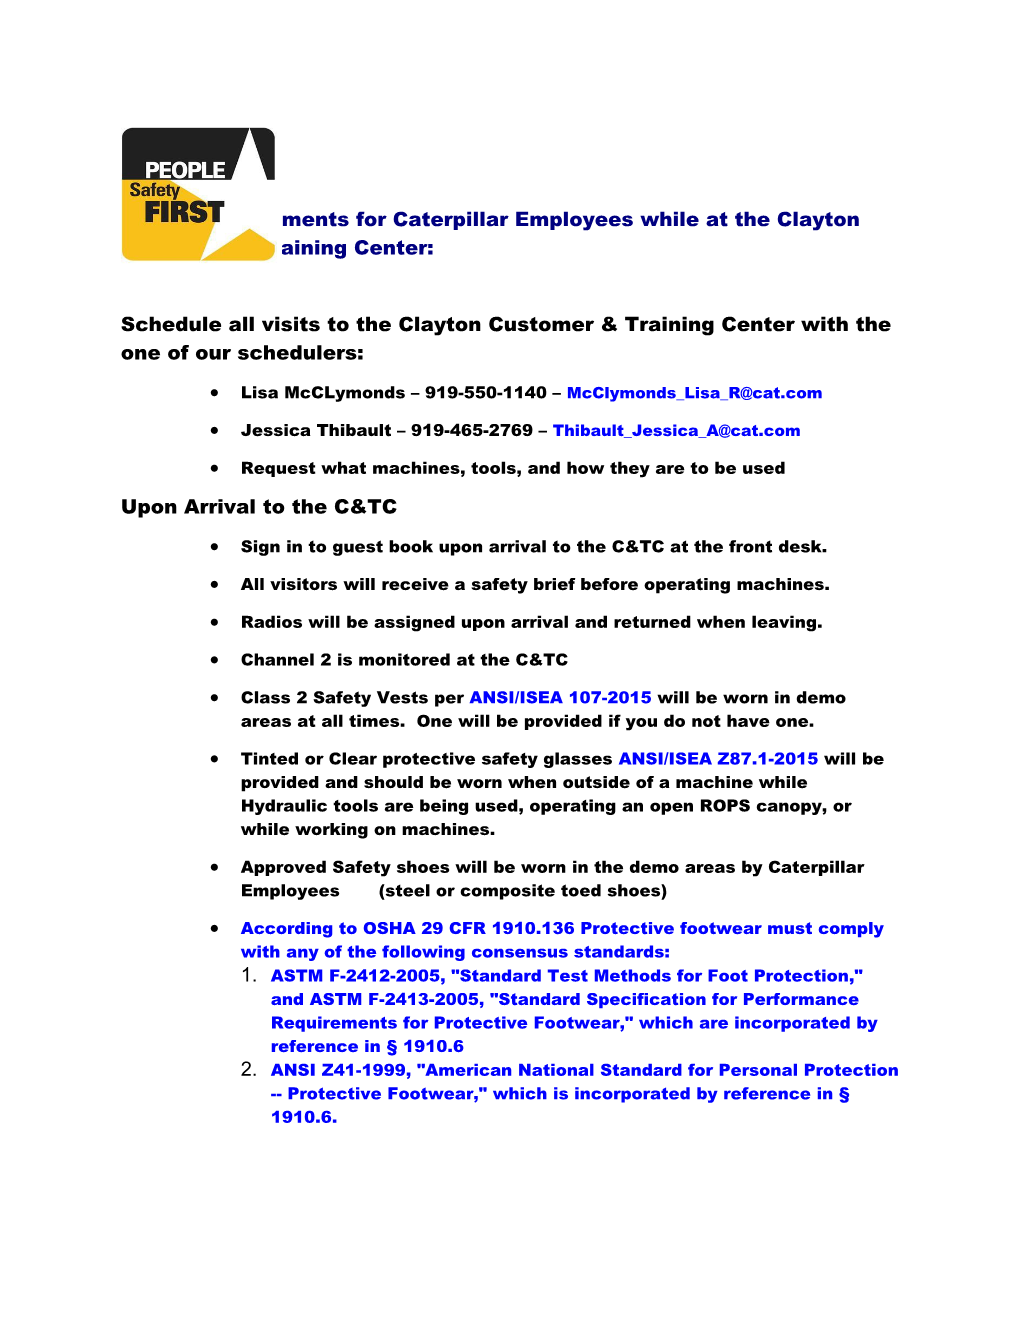 Safety Requirements for Caterpillar Employees While at the Clayton Customer & Training Center